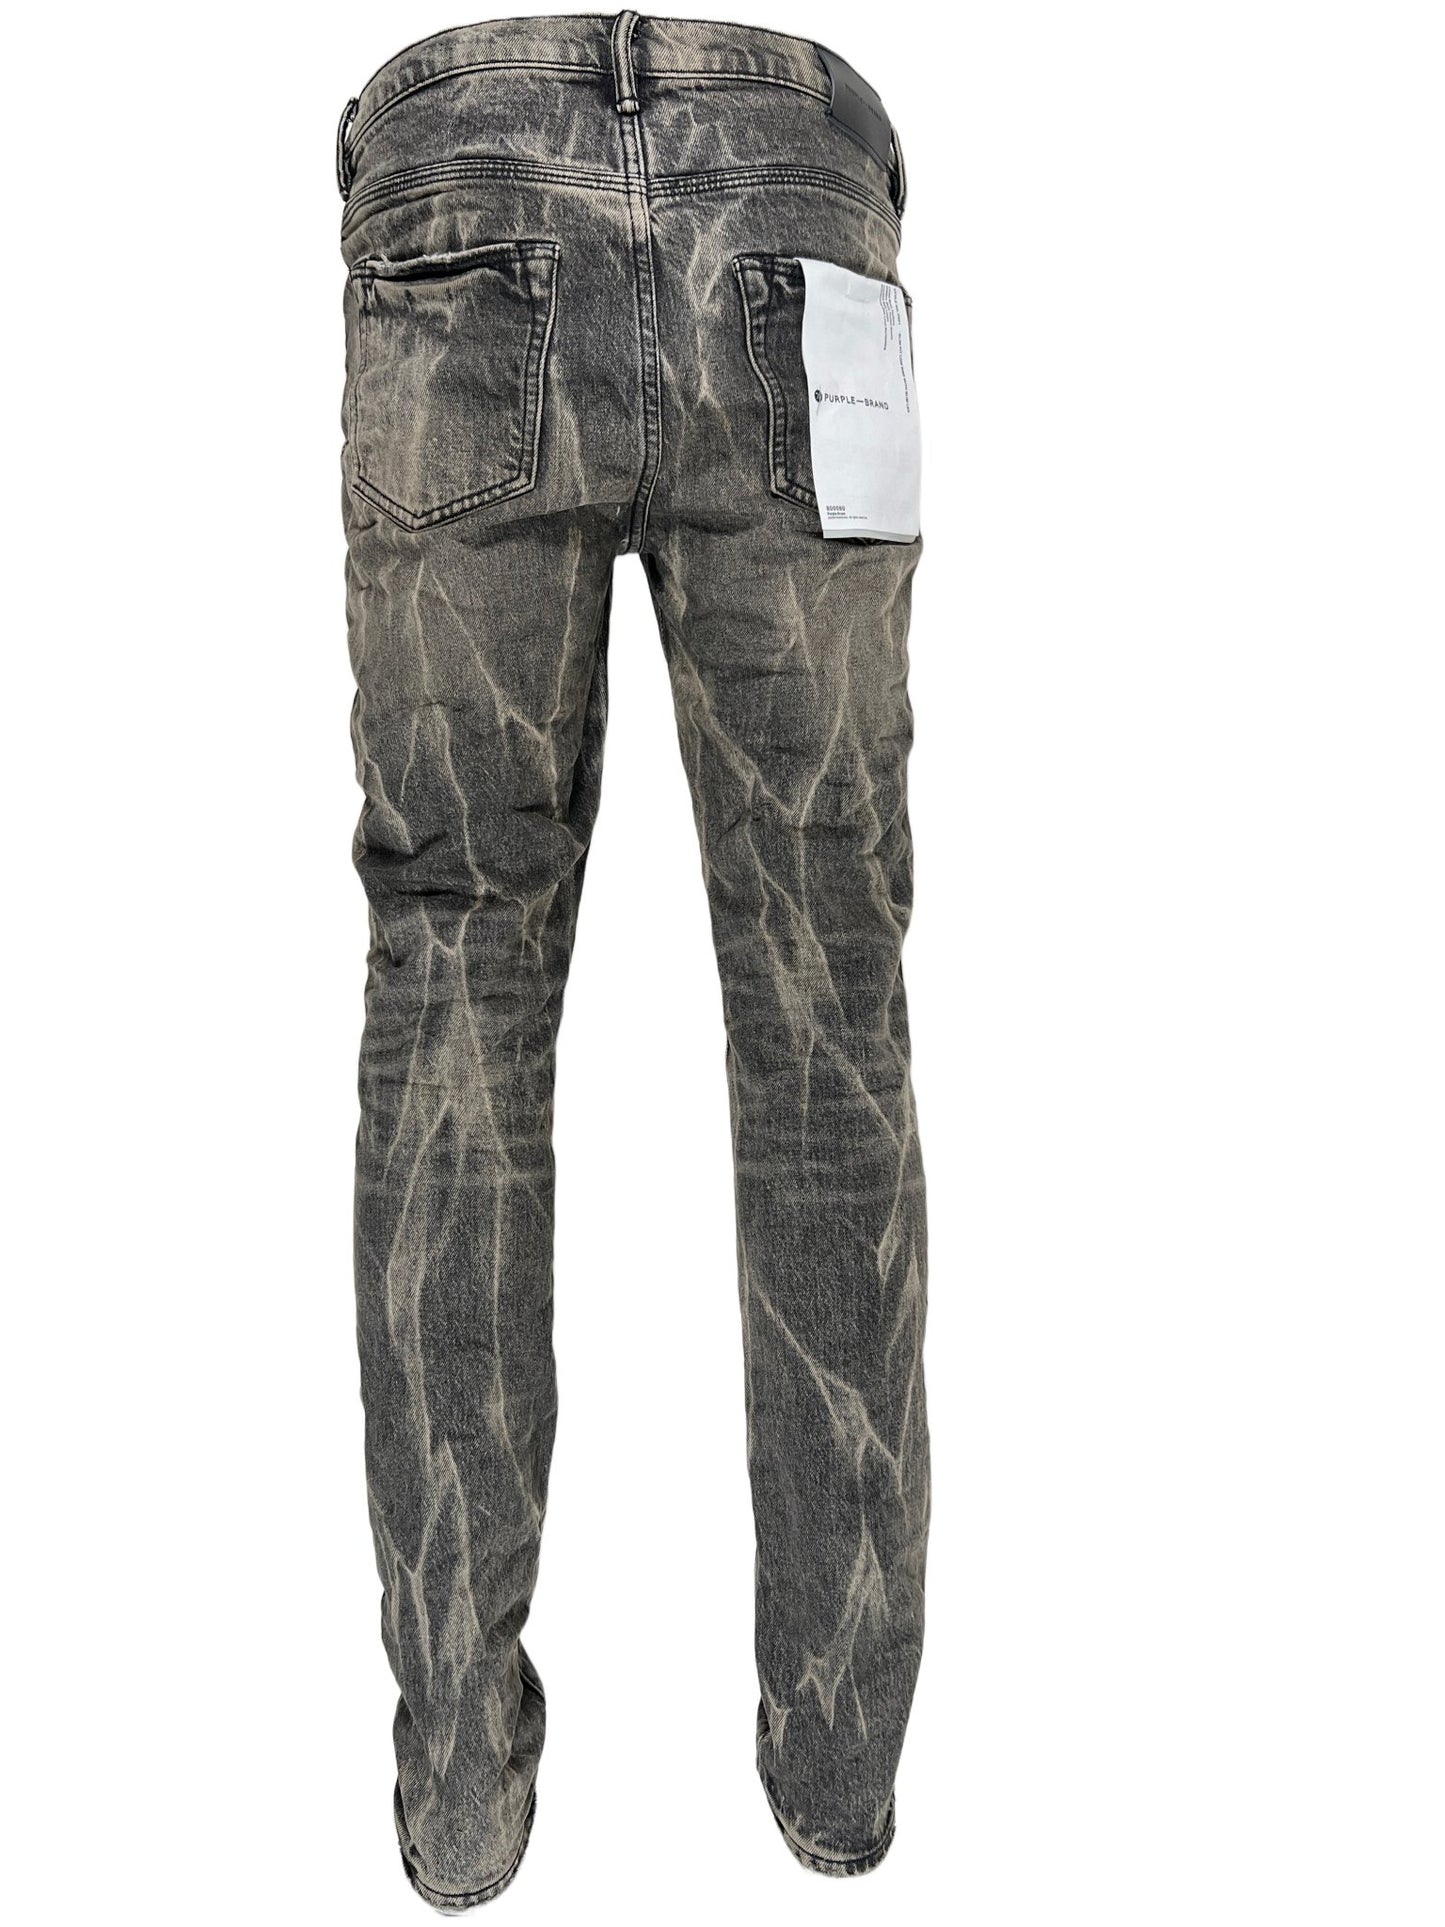 A pair of men's cotton jeans with a camouflage pattern in a faded wash by PURPLE BRAND JEANS P001-WBTA WASHED BLACK TIE ACID.